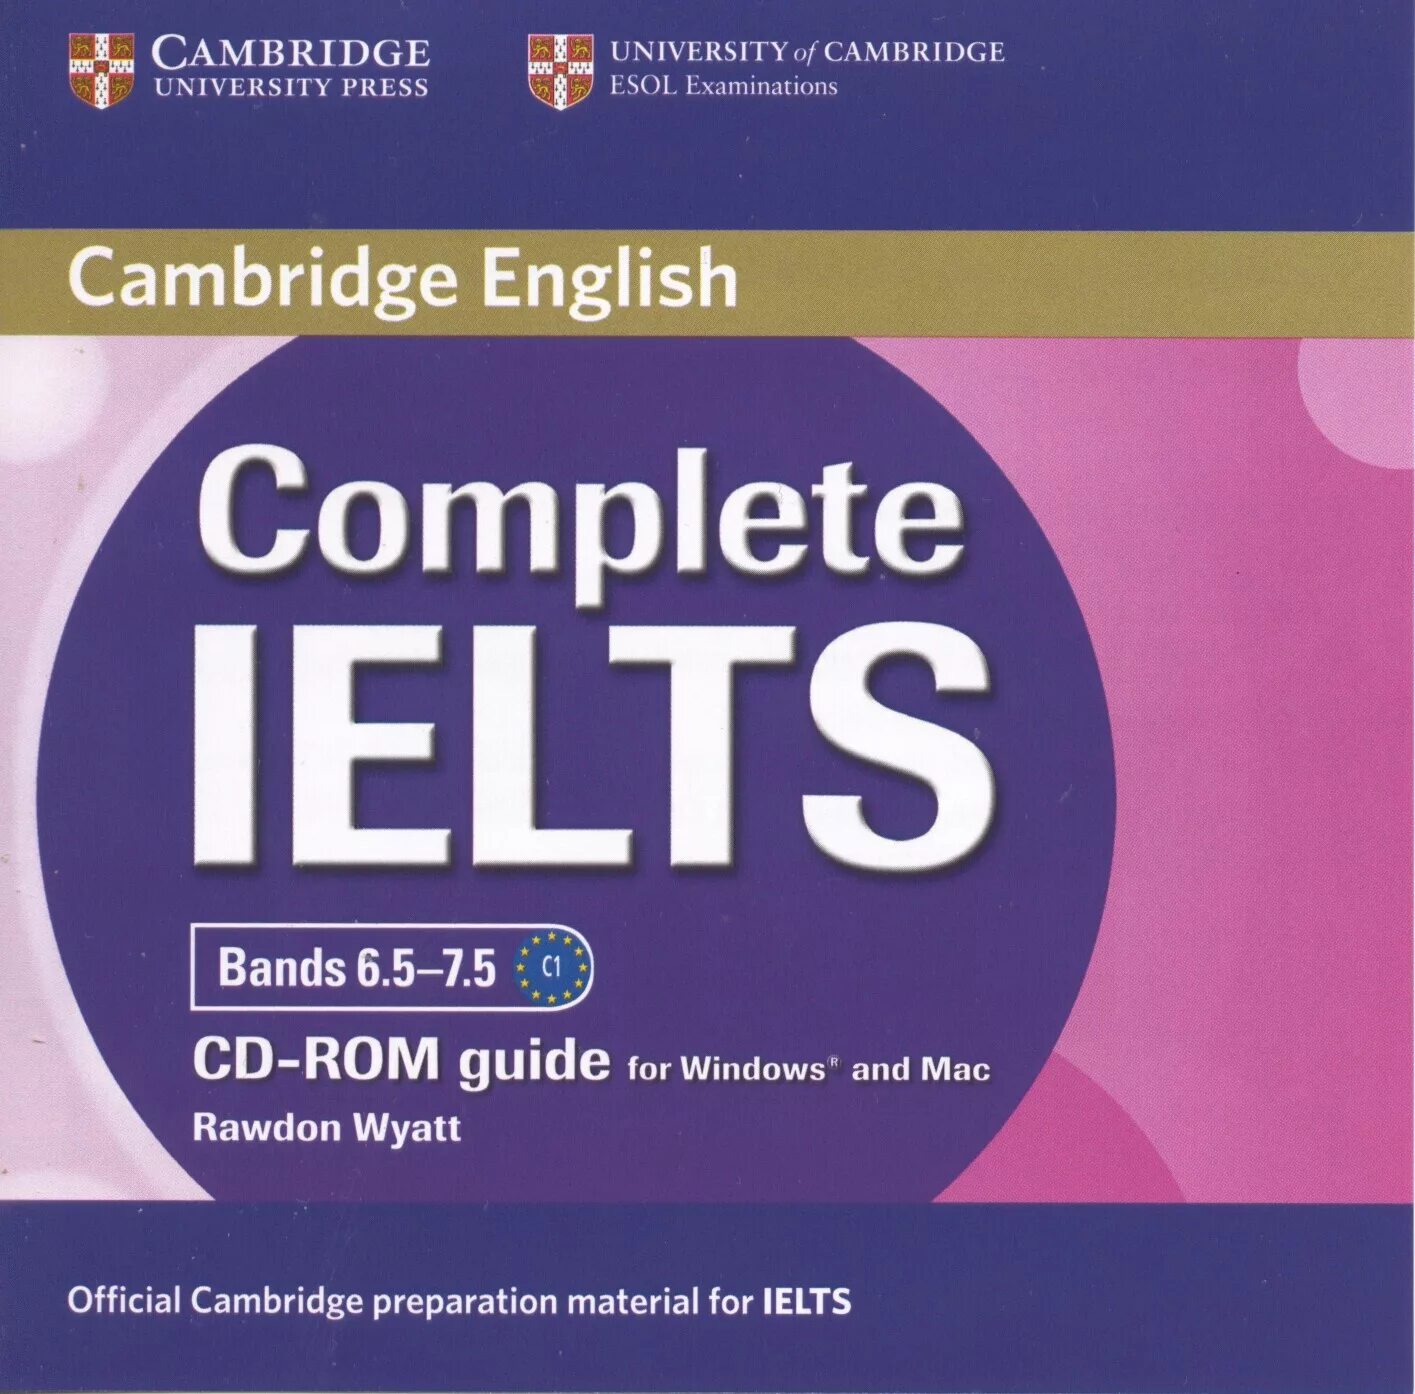 Complete first english. Complete IELTS 6.5 - 7.5 student's book. Complete IELTS Bands 4-5 student's. Complete IELTS Bands 4-5 Workbook. Complete IELTS Bands 6.5-7.5.